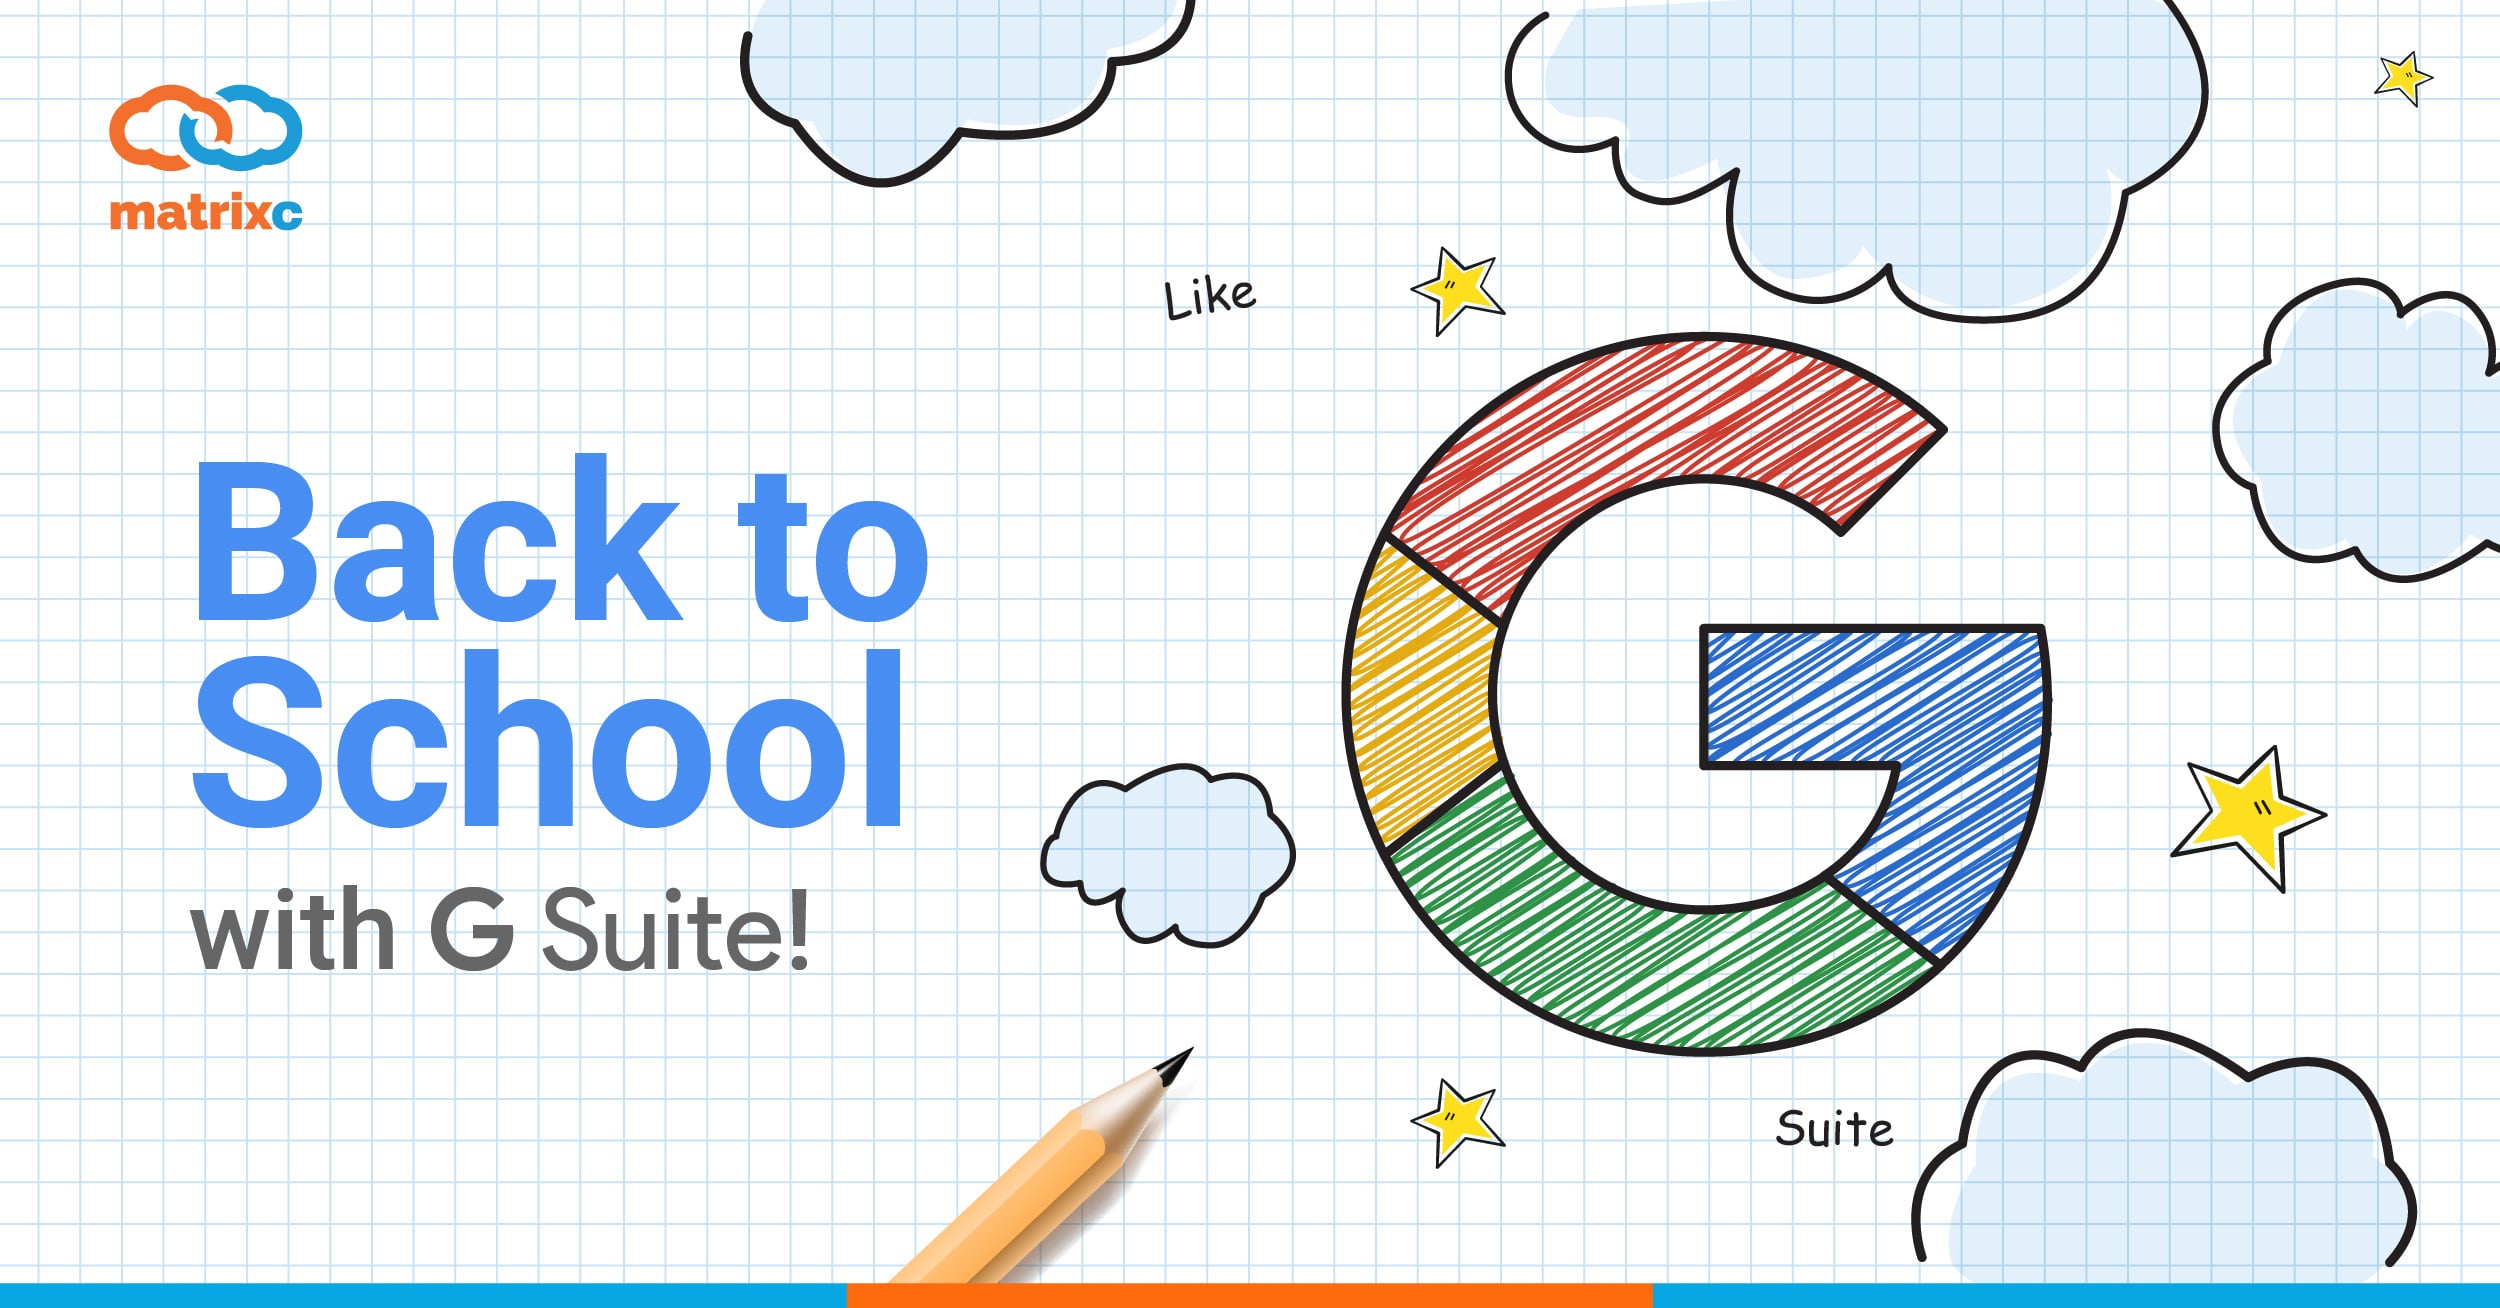 Back to School with G Suite